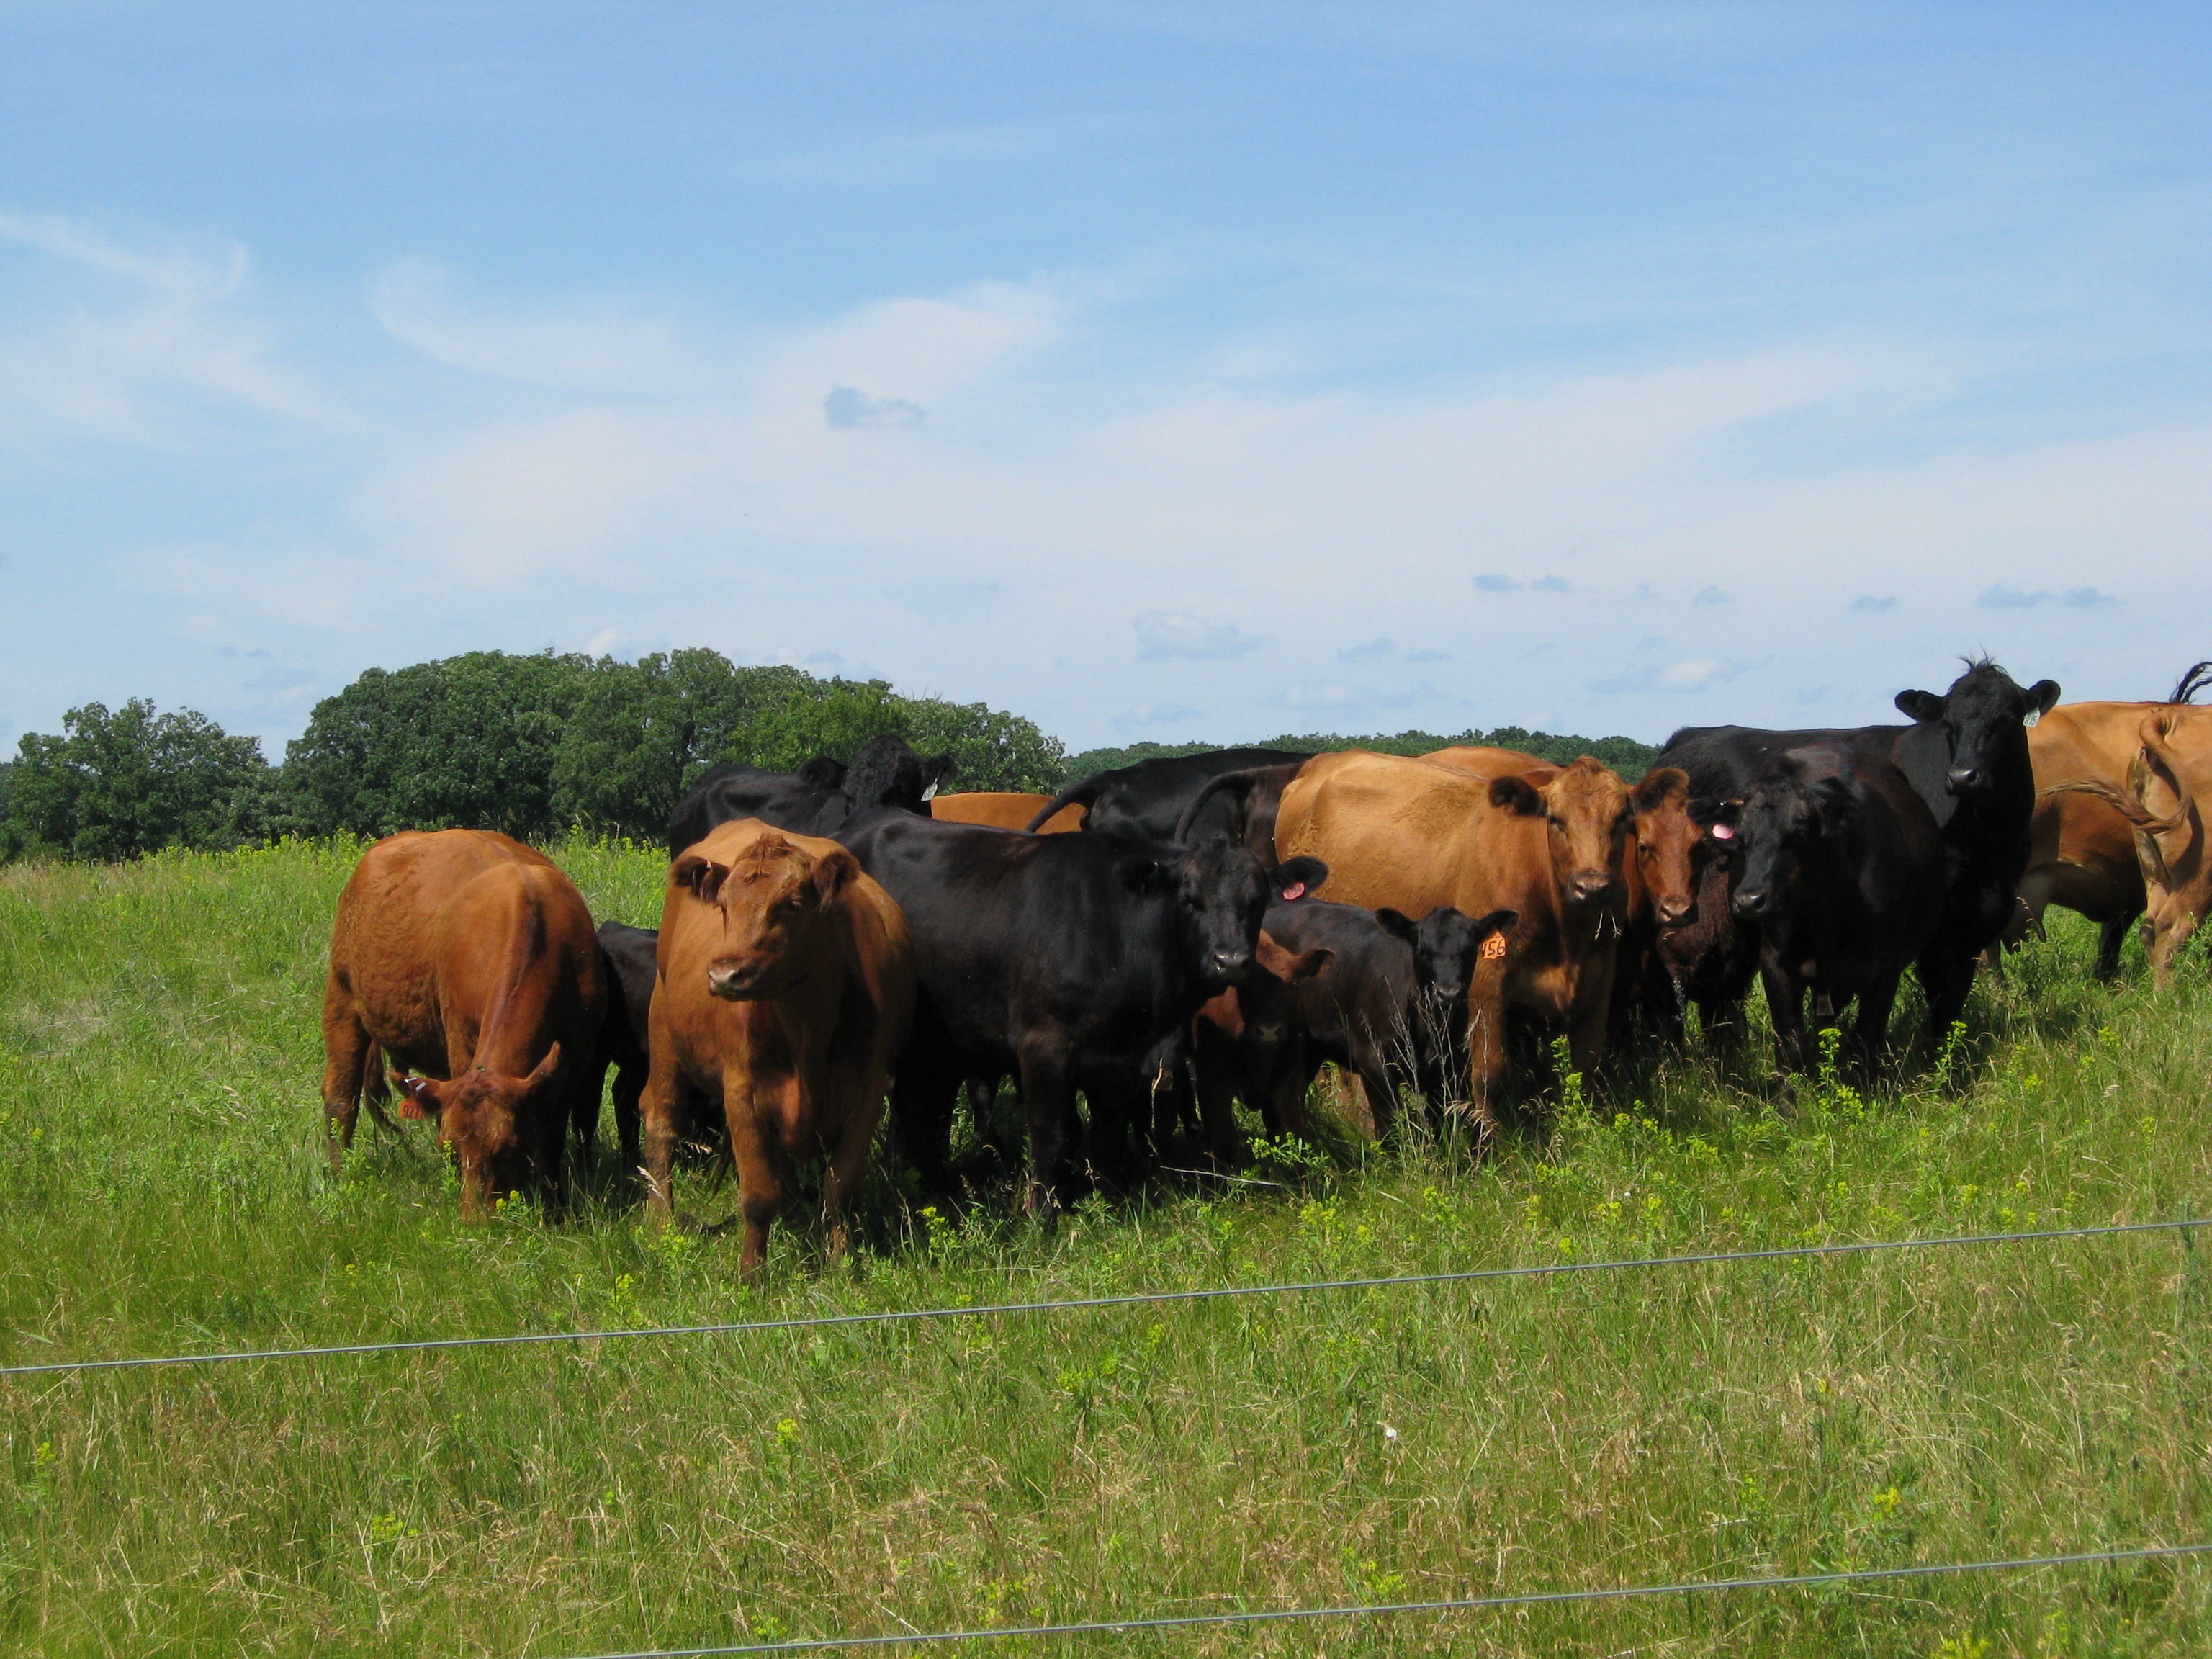 Cattle in a field of spurge infestation.